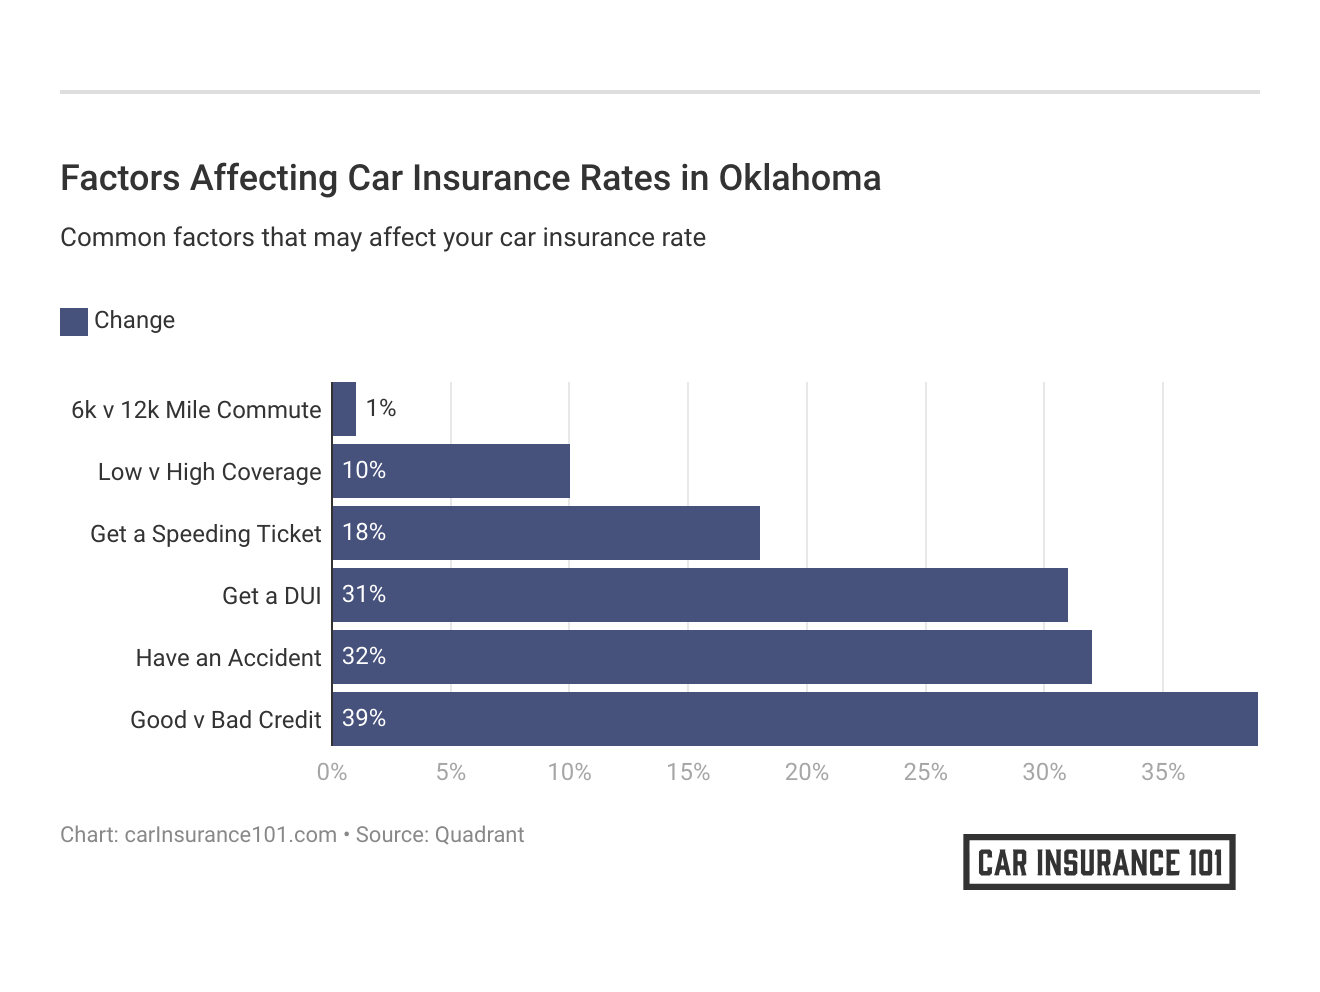 <h3>Factors Affecting Car Insurance Rates in Oklahoma</h3>